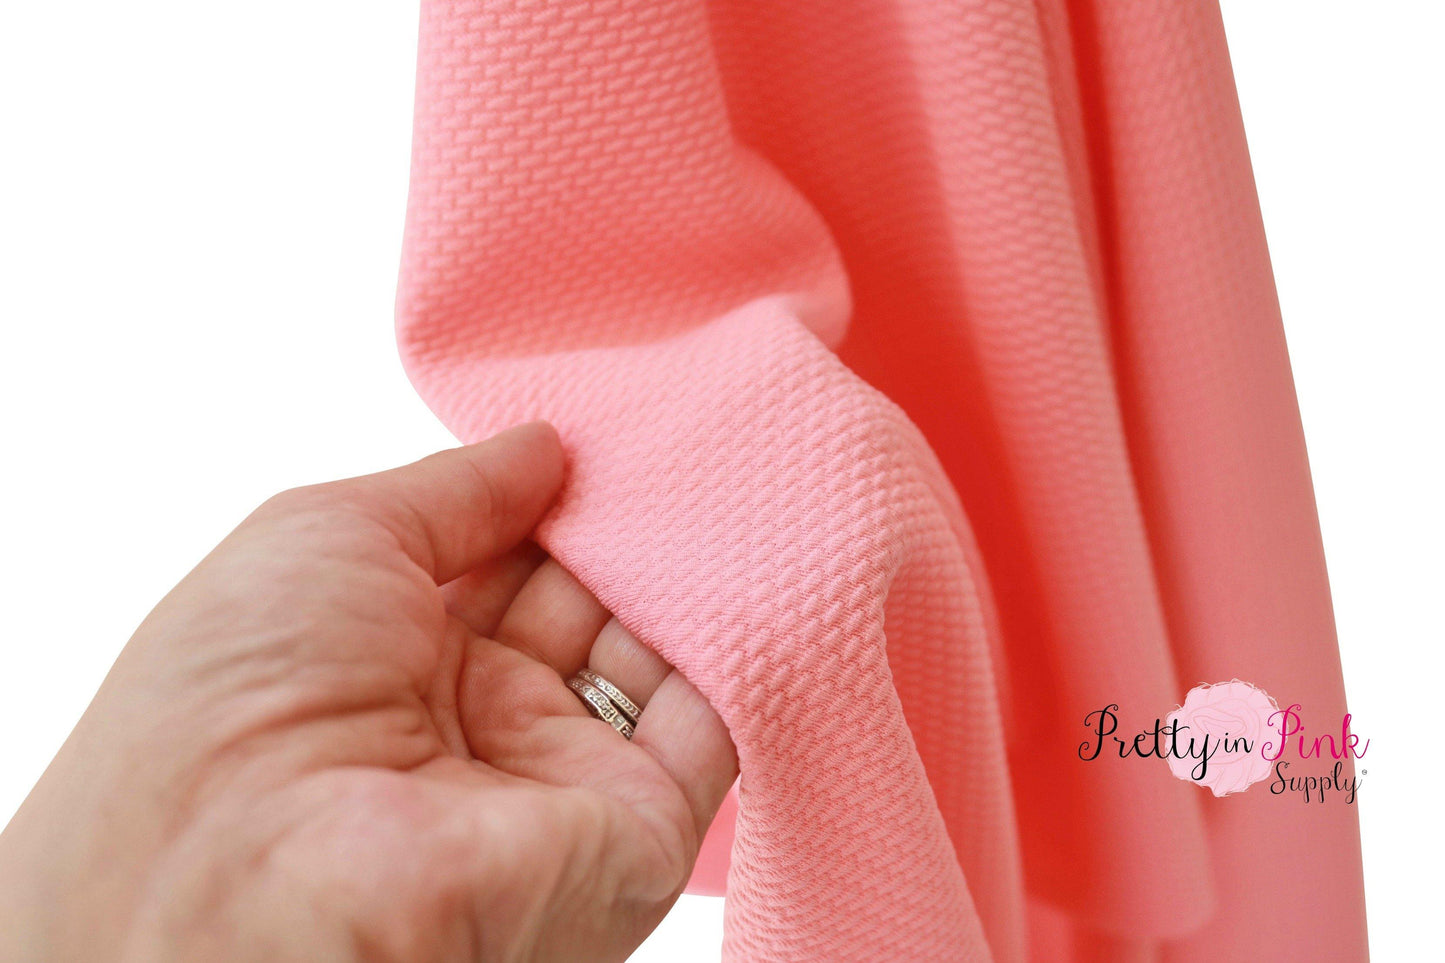 Pink Salmon Solid Stretch Liverpool Fabric - Pretty in Pink Supply